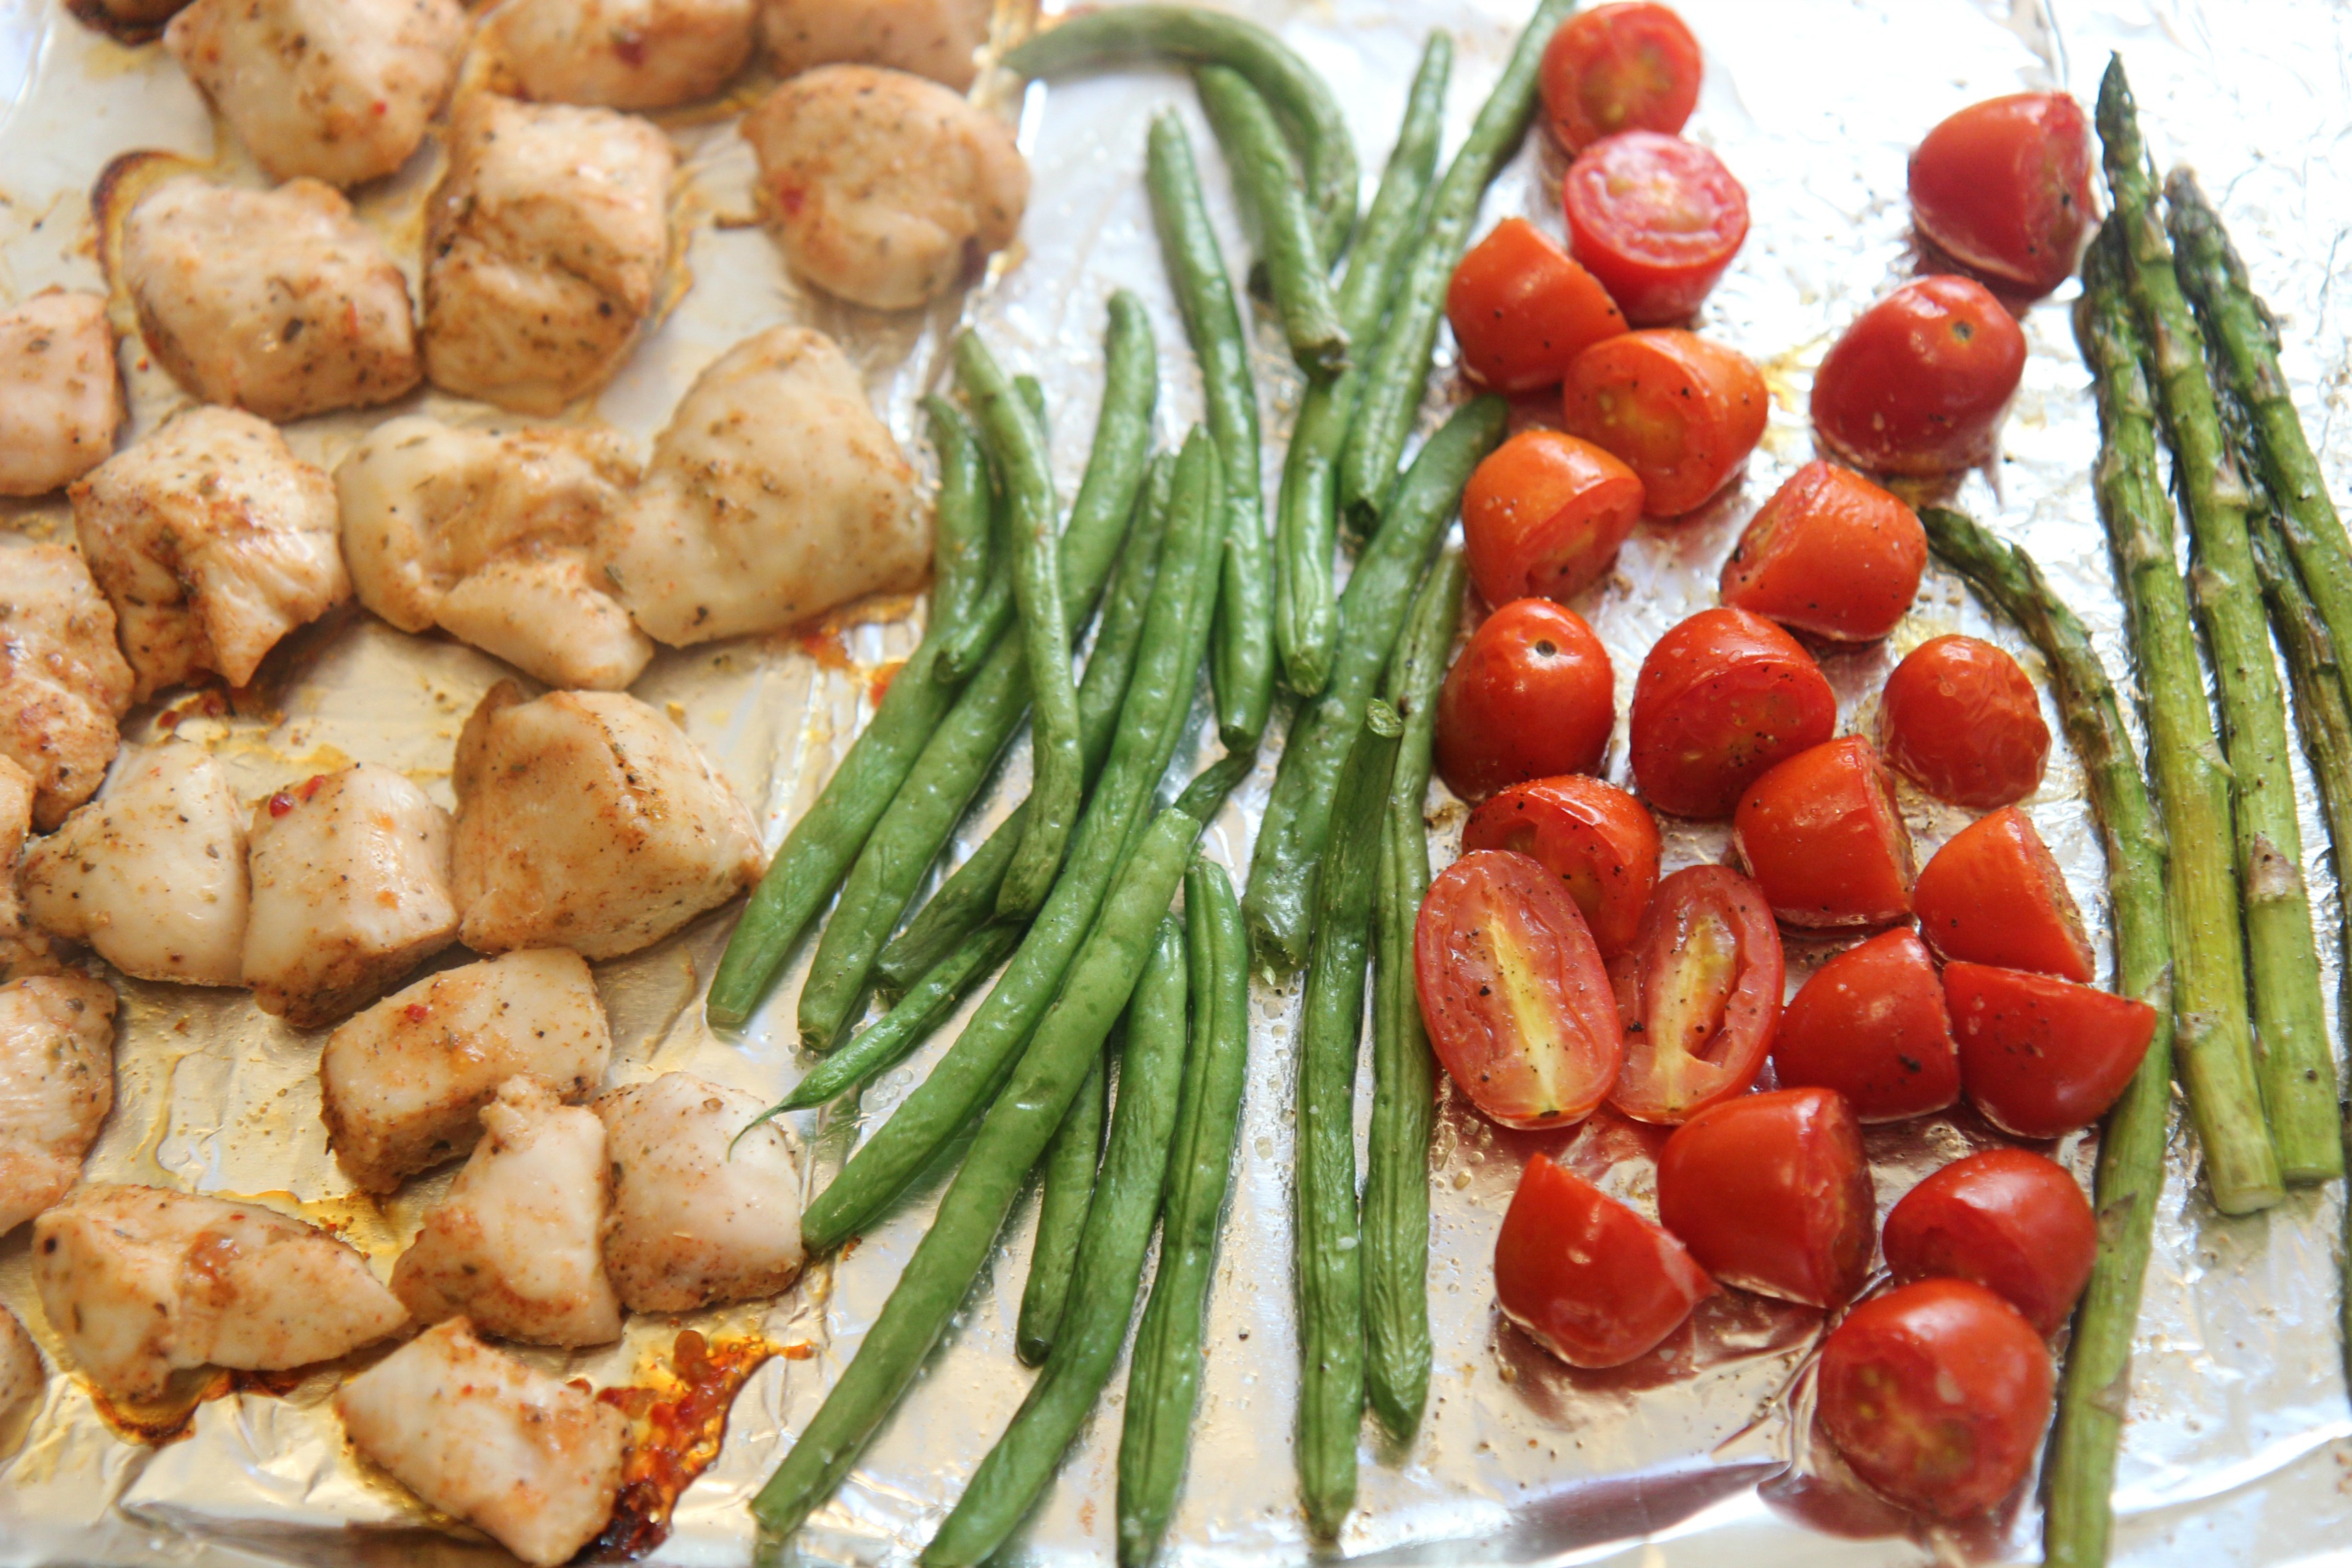 One Pan Chicken and Veggies - Seasoned chicken with green beans, asparagus, and cherry tomatoes.